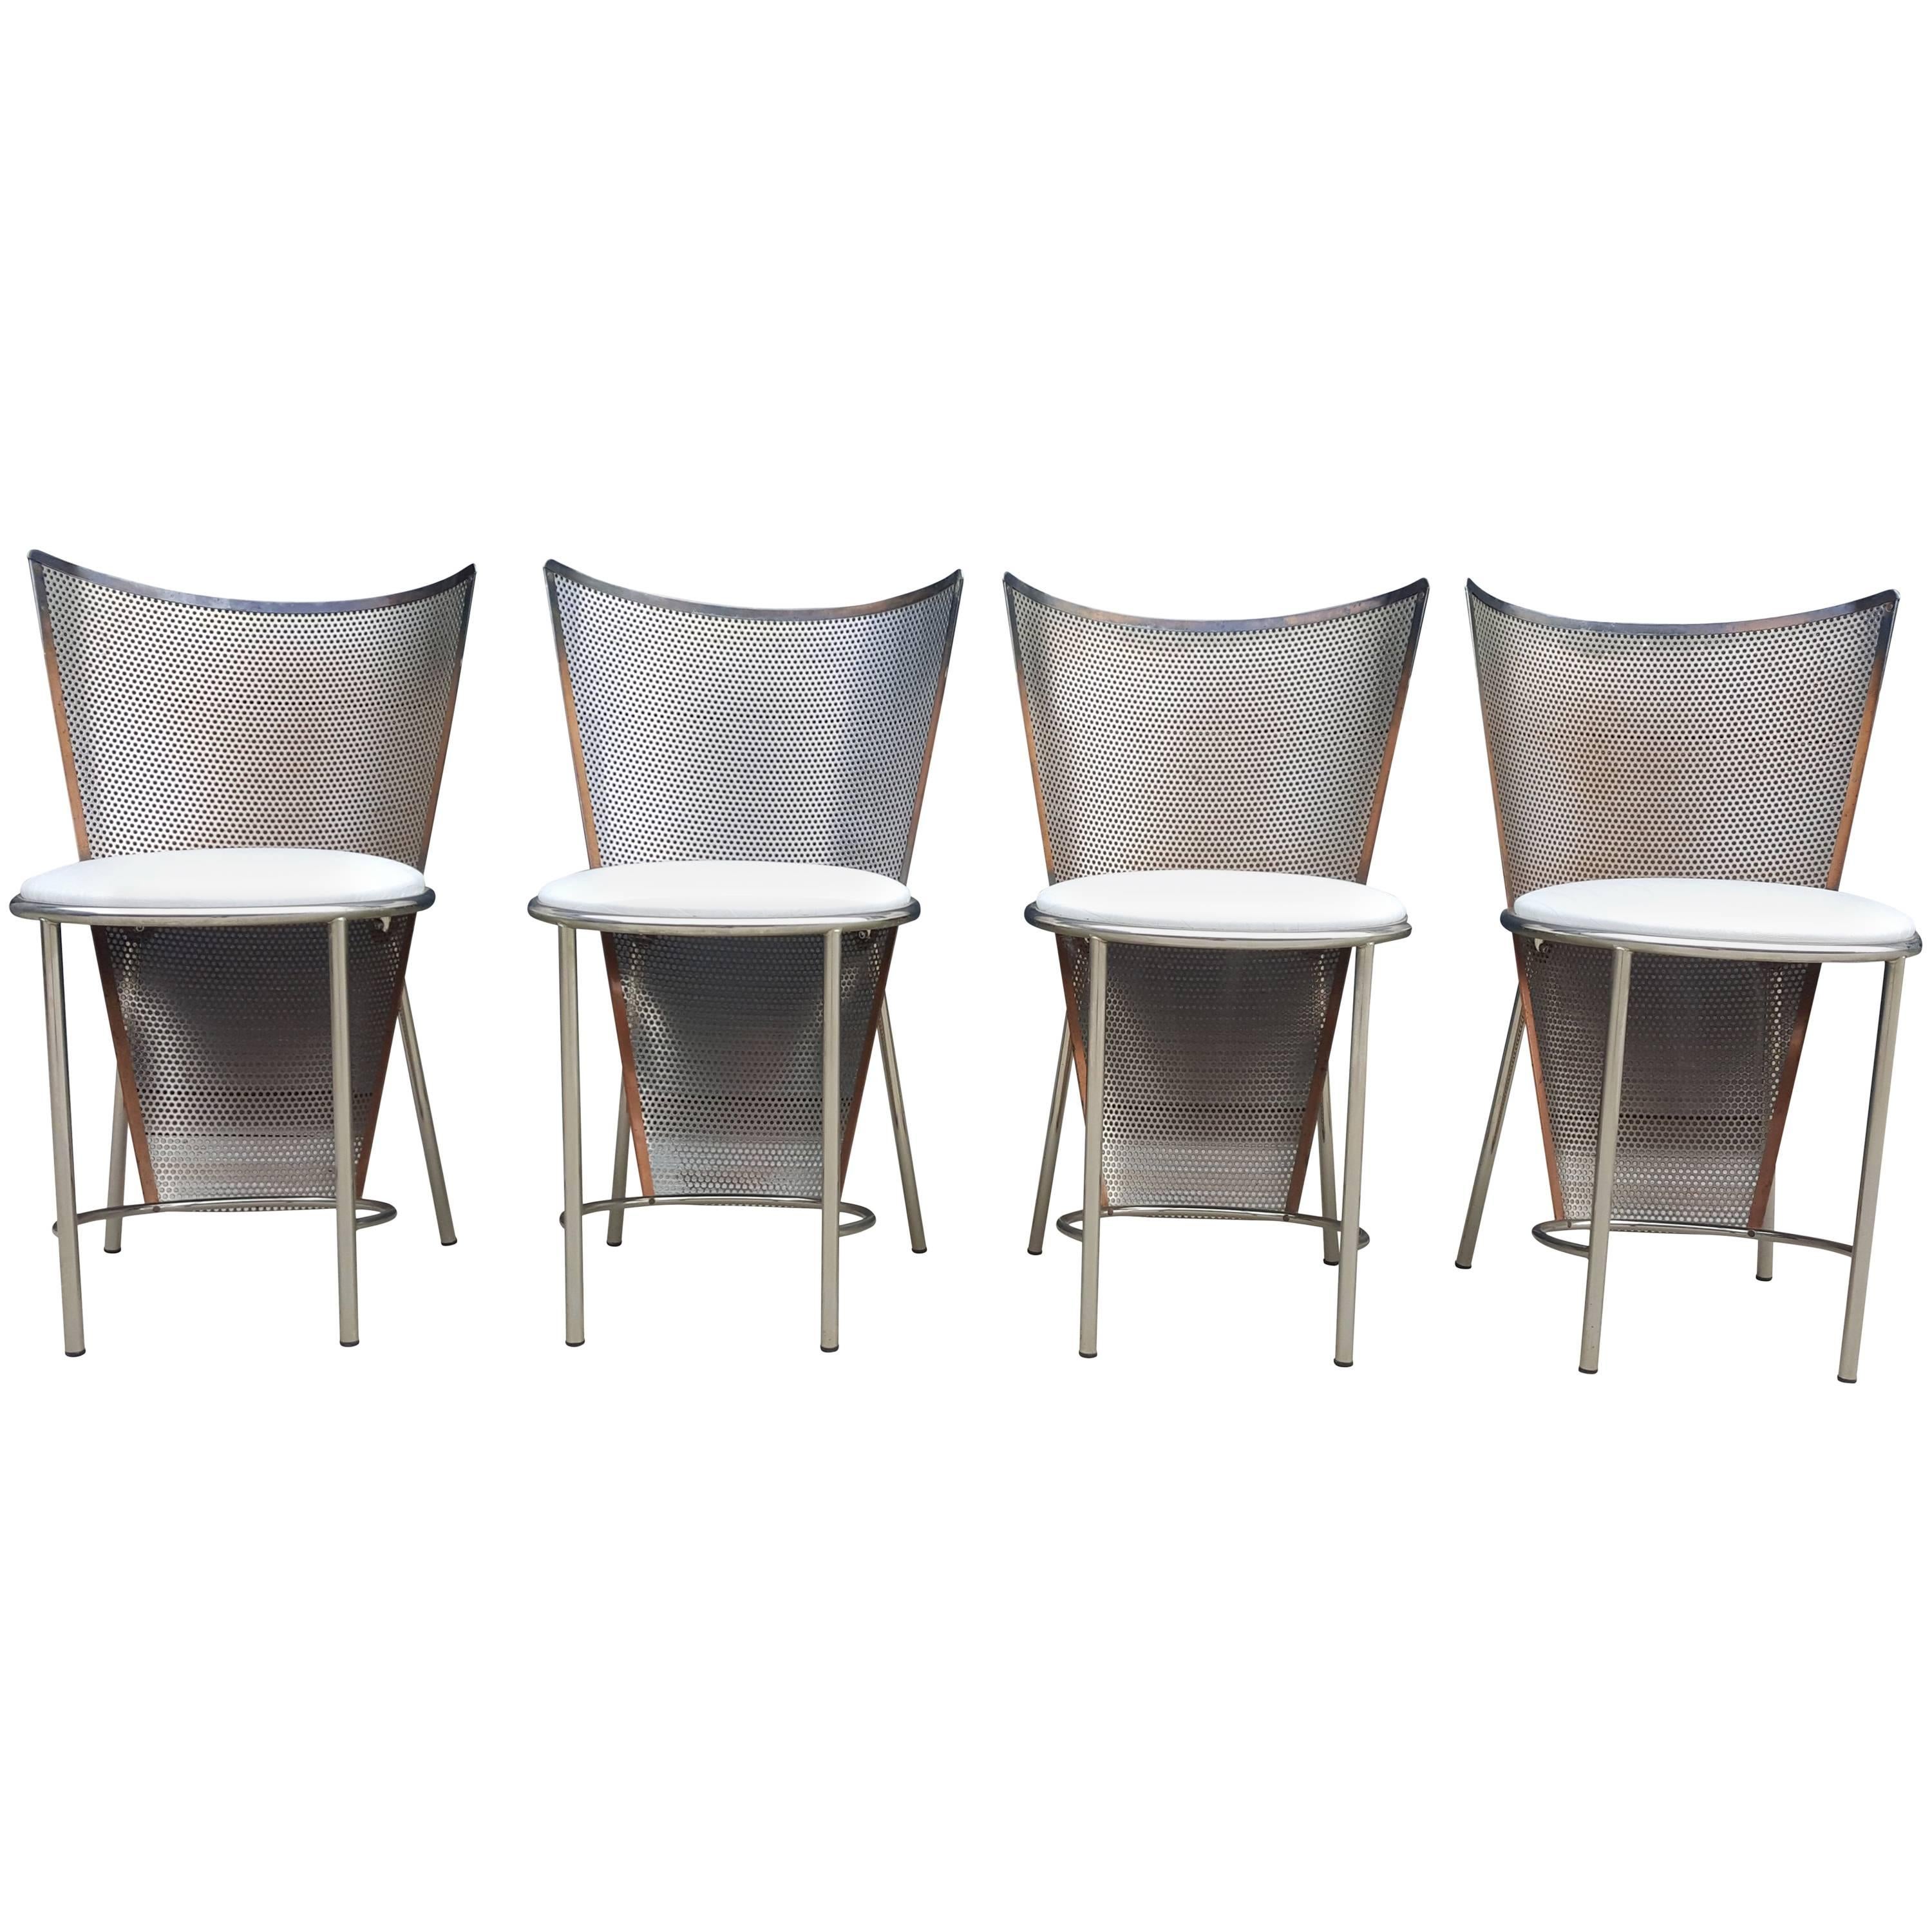 Set of Four Chairs, Belgo Chrome, World Expo, Mid-Century Modern For Sale